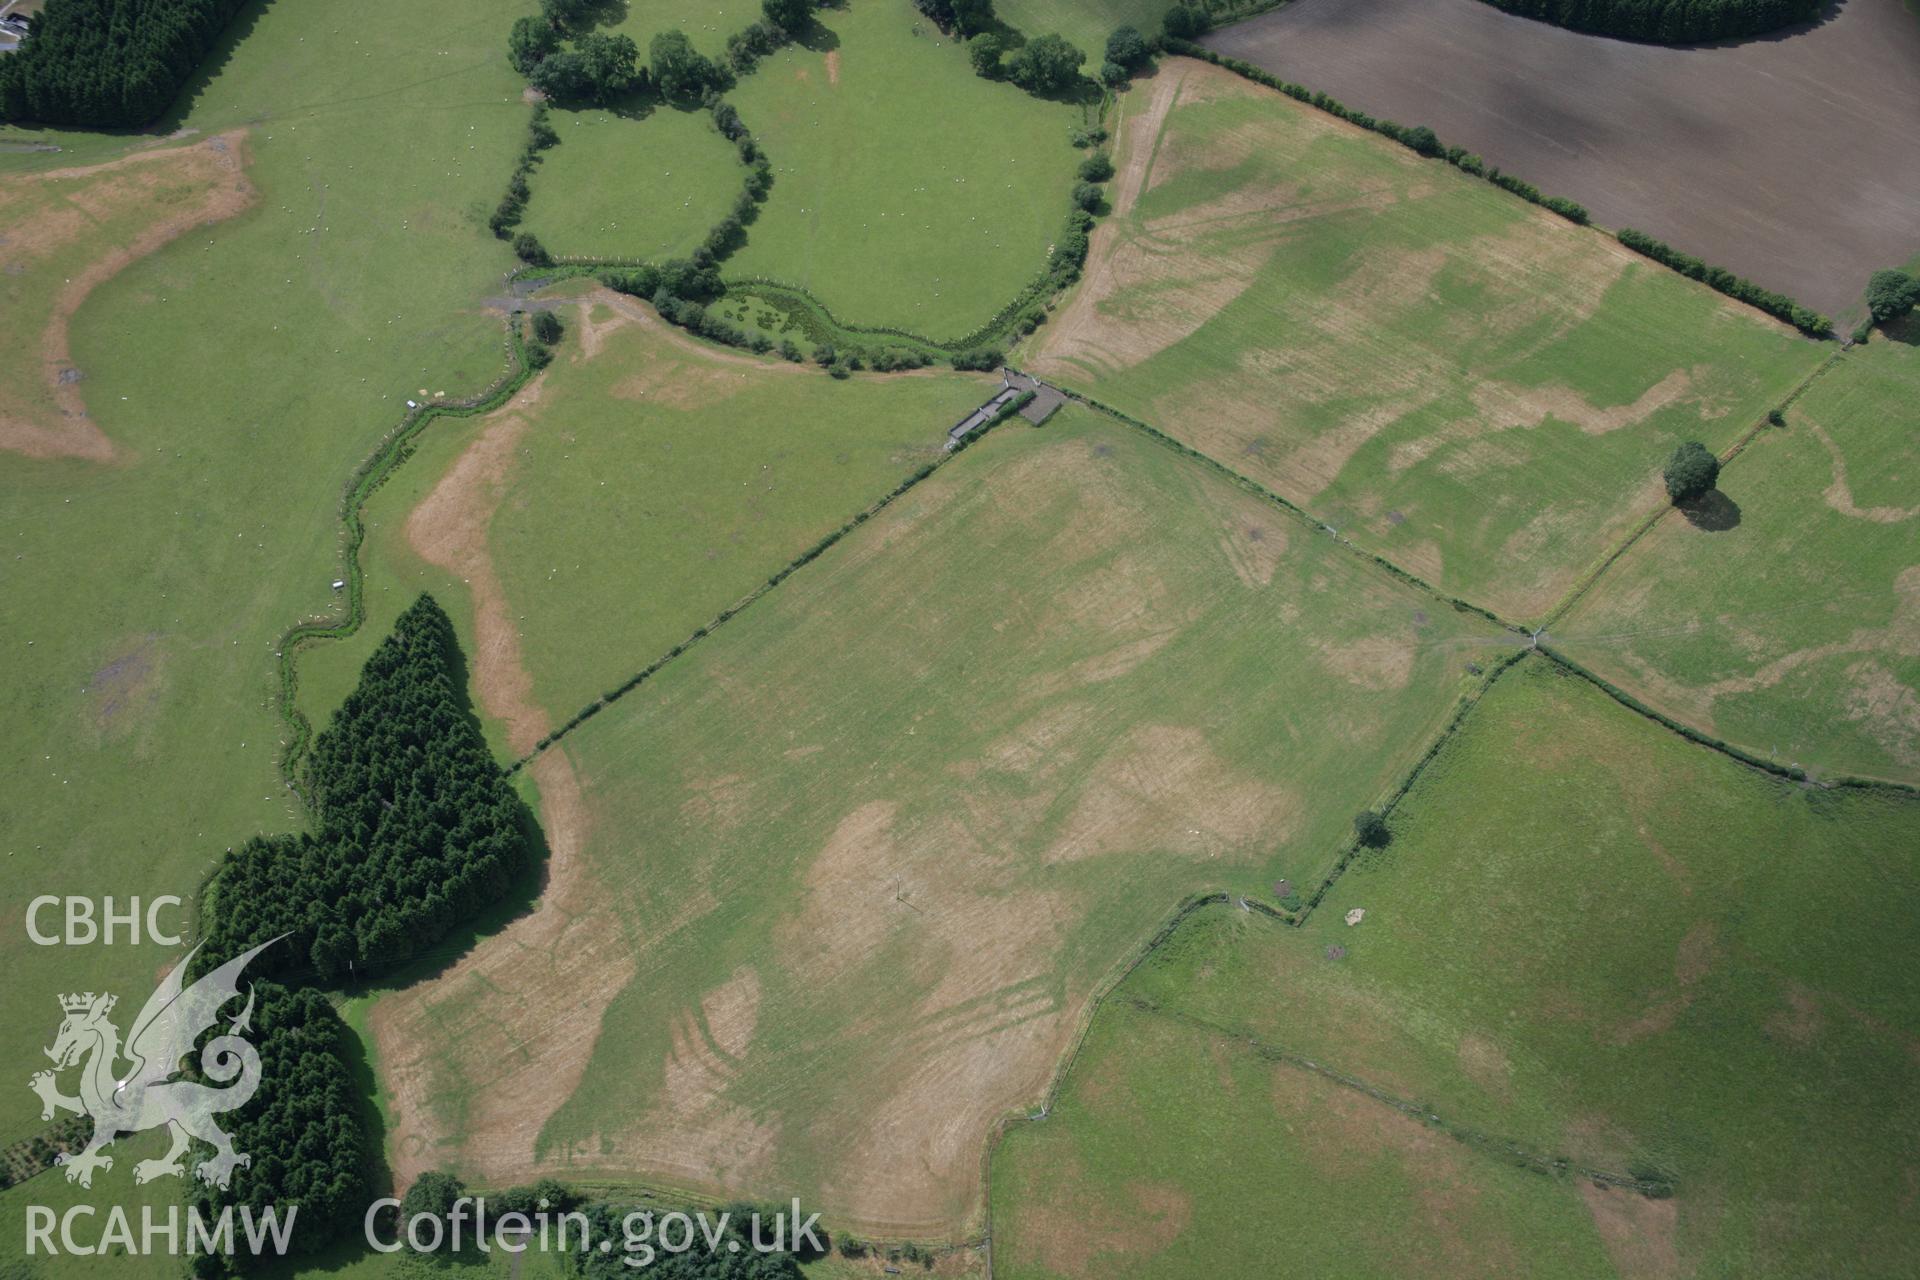 RCAHMW colour oblique aerial photograph of Llanfor Roman Military Complex visible in cropmarks, viewed from the east. Taken on 31 July 2006 by Toby Driver.